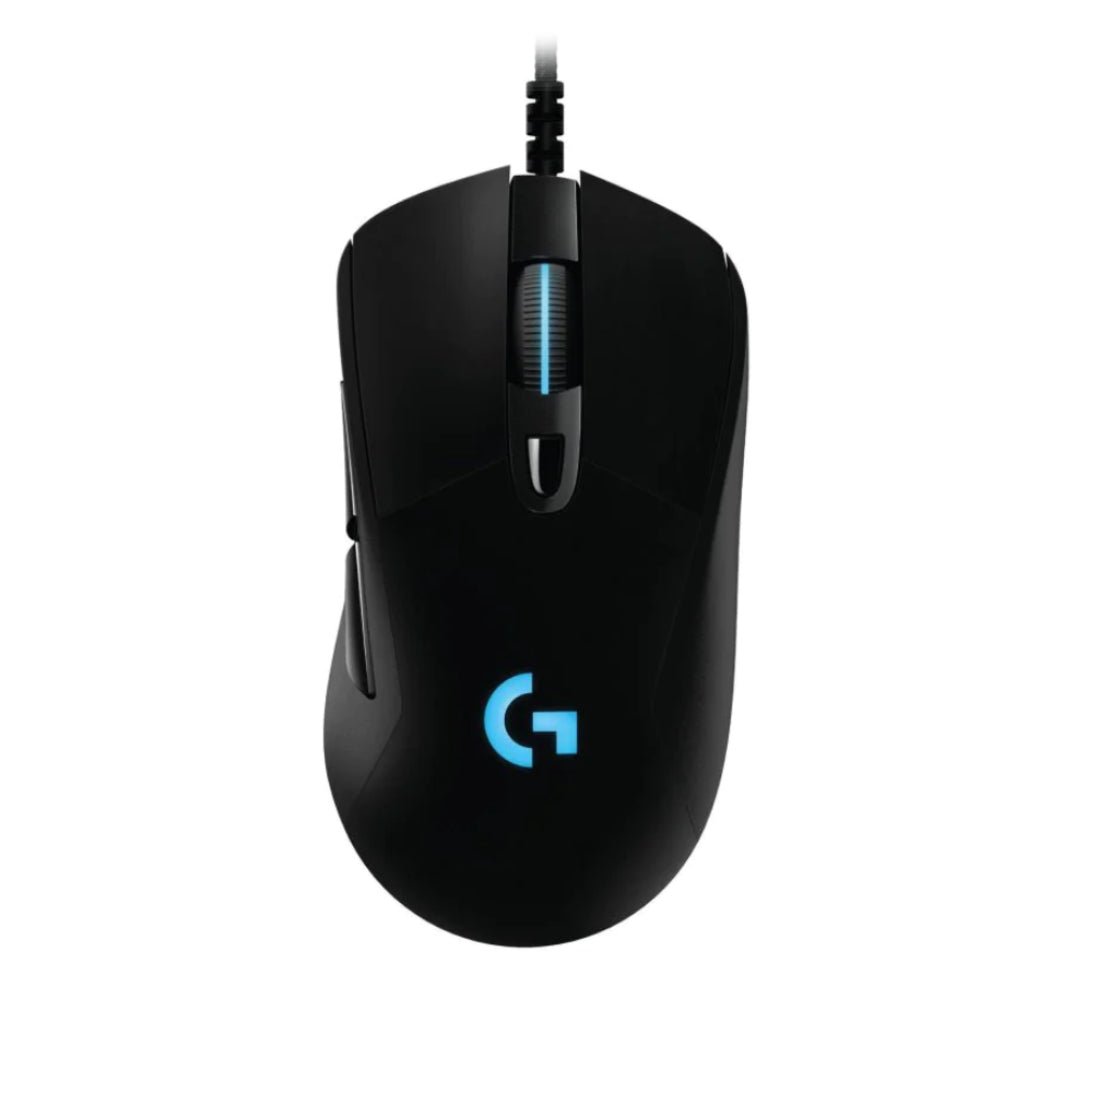 Logitech G403 Prodigy RGB Gaming Mouse - Wired - فأرة - Store 974 | ستور ٩٧٤